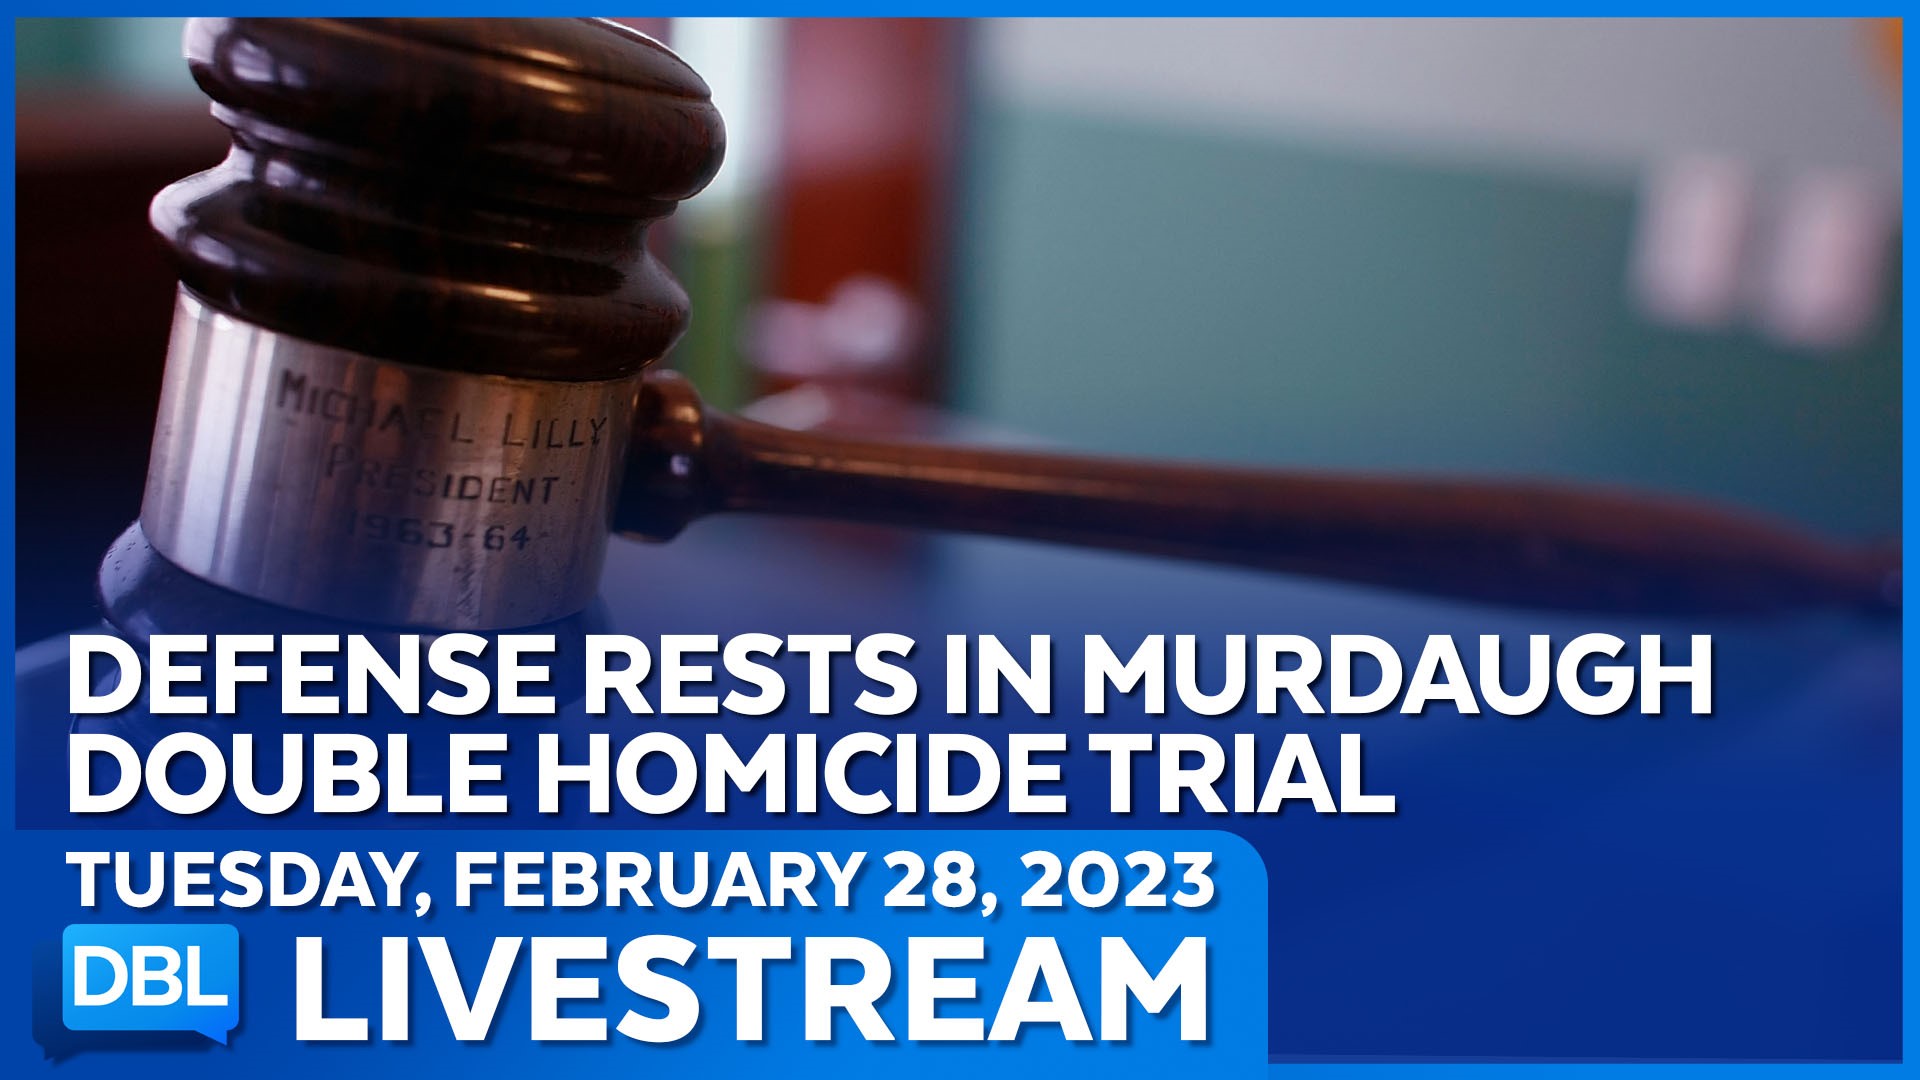 Veteran trial attorney Mark Eiglarsh joins to discuss the Murdaugh double homicide trial; Dr. Kohli discusses a sweetener linked to health risks.